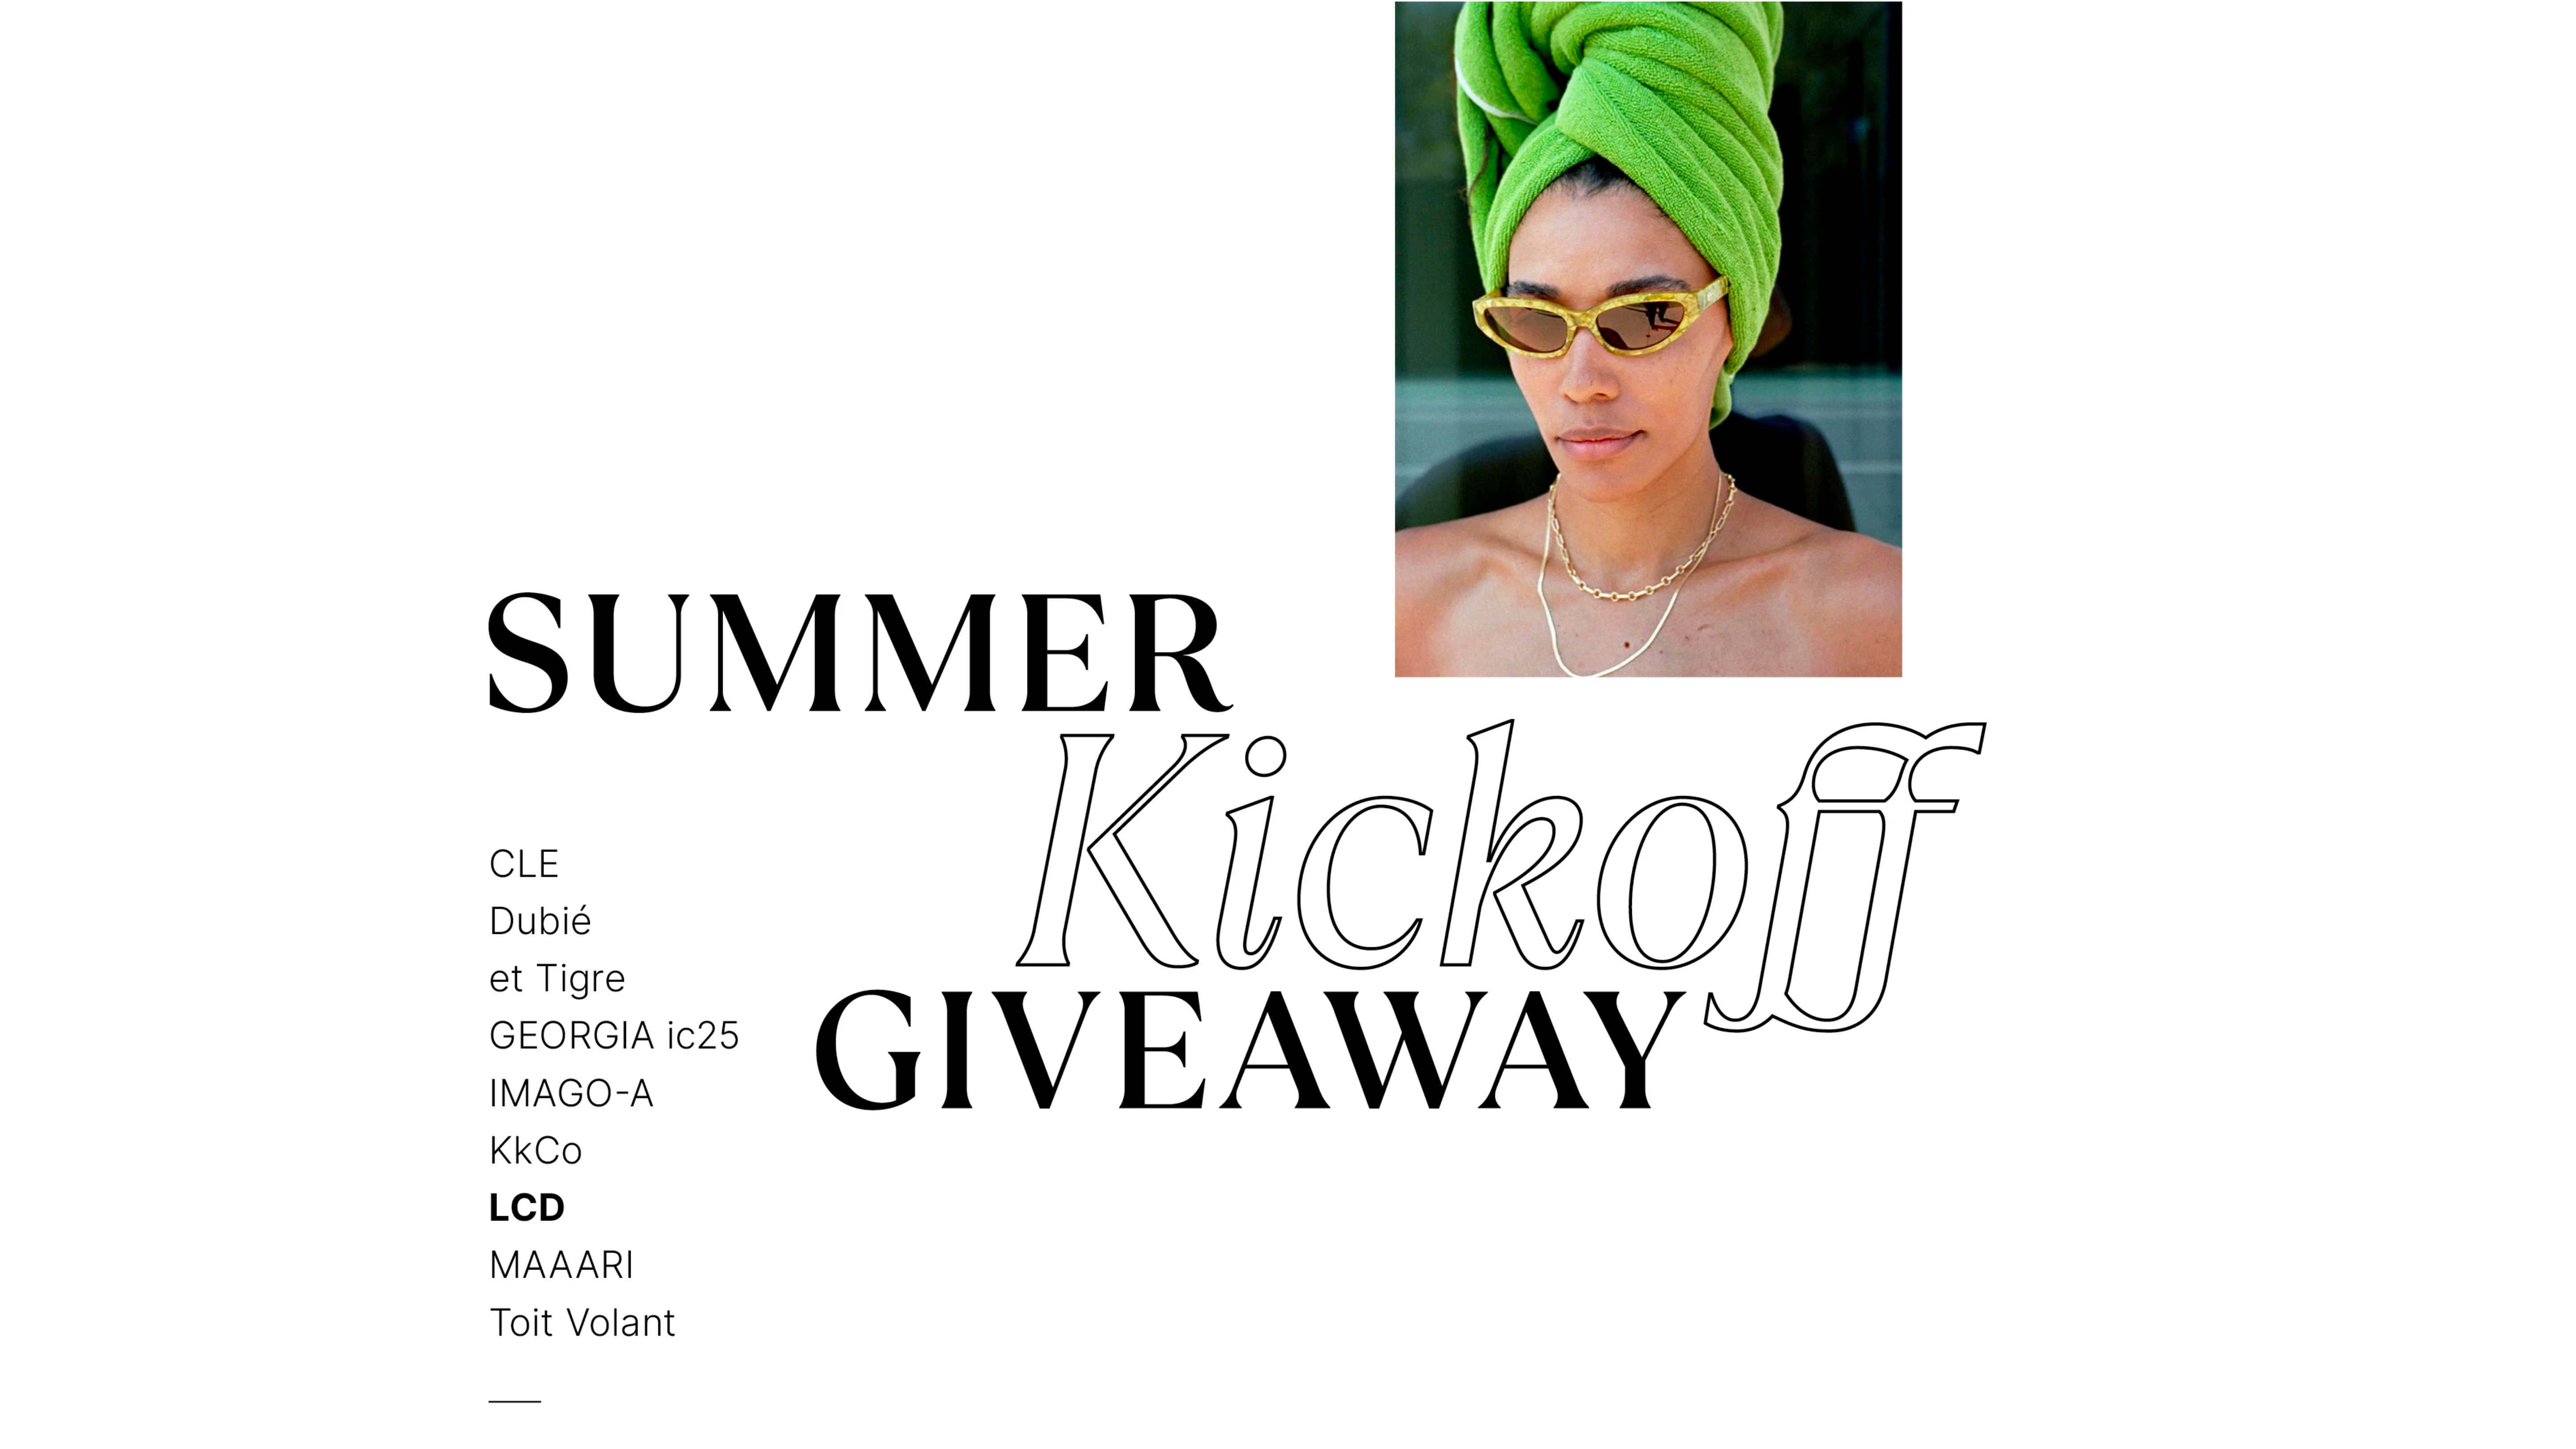 Summer Giveaway! Over $2000 worth of goodies from 9 amazing brands.